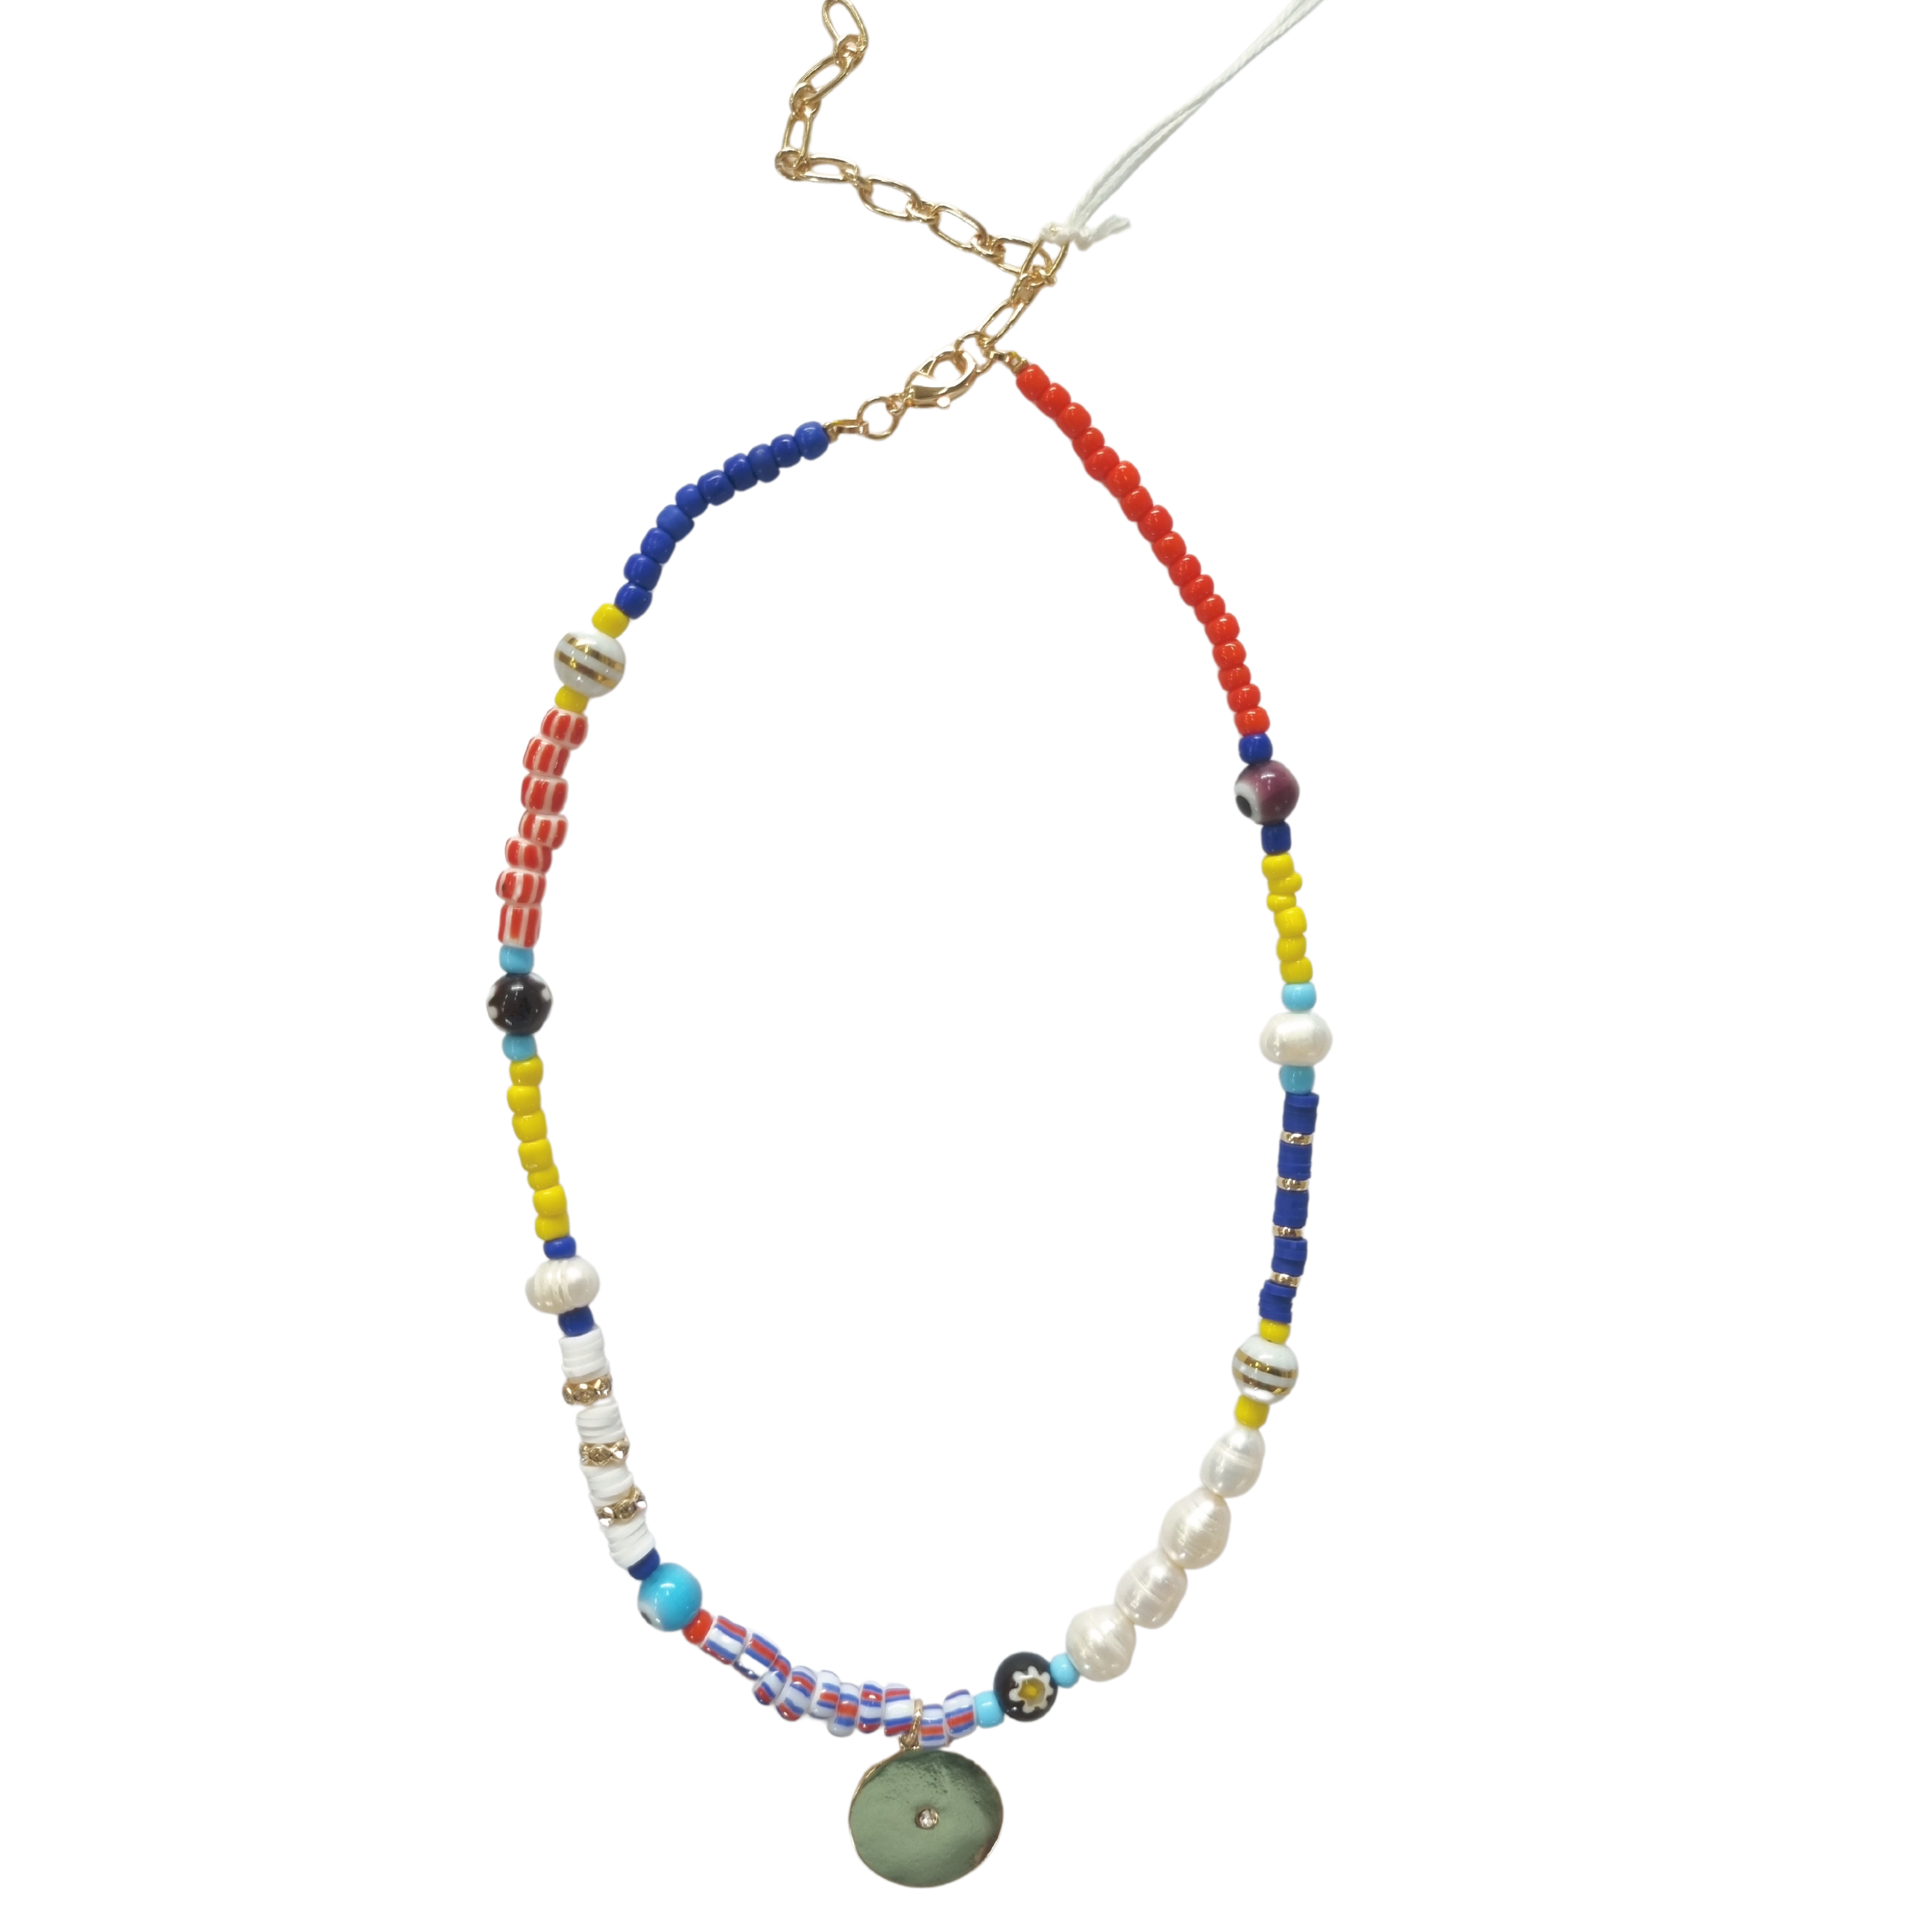 Sonia Short Beaded Necklace